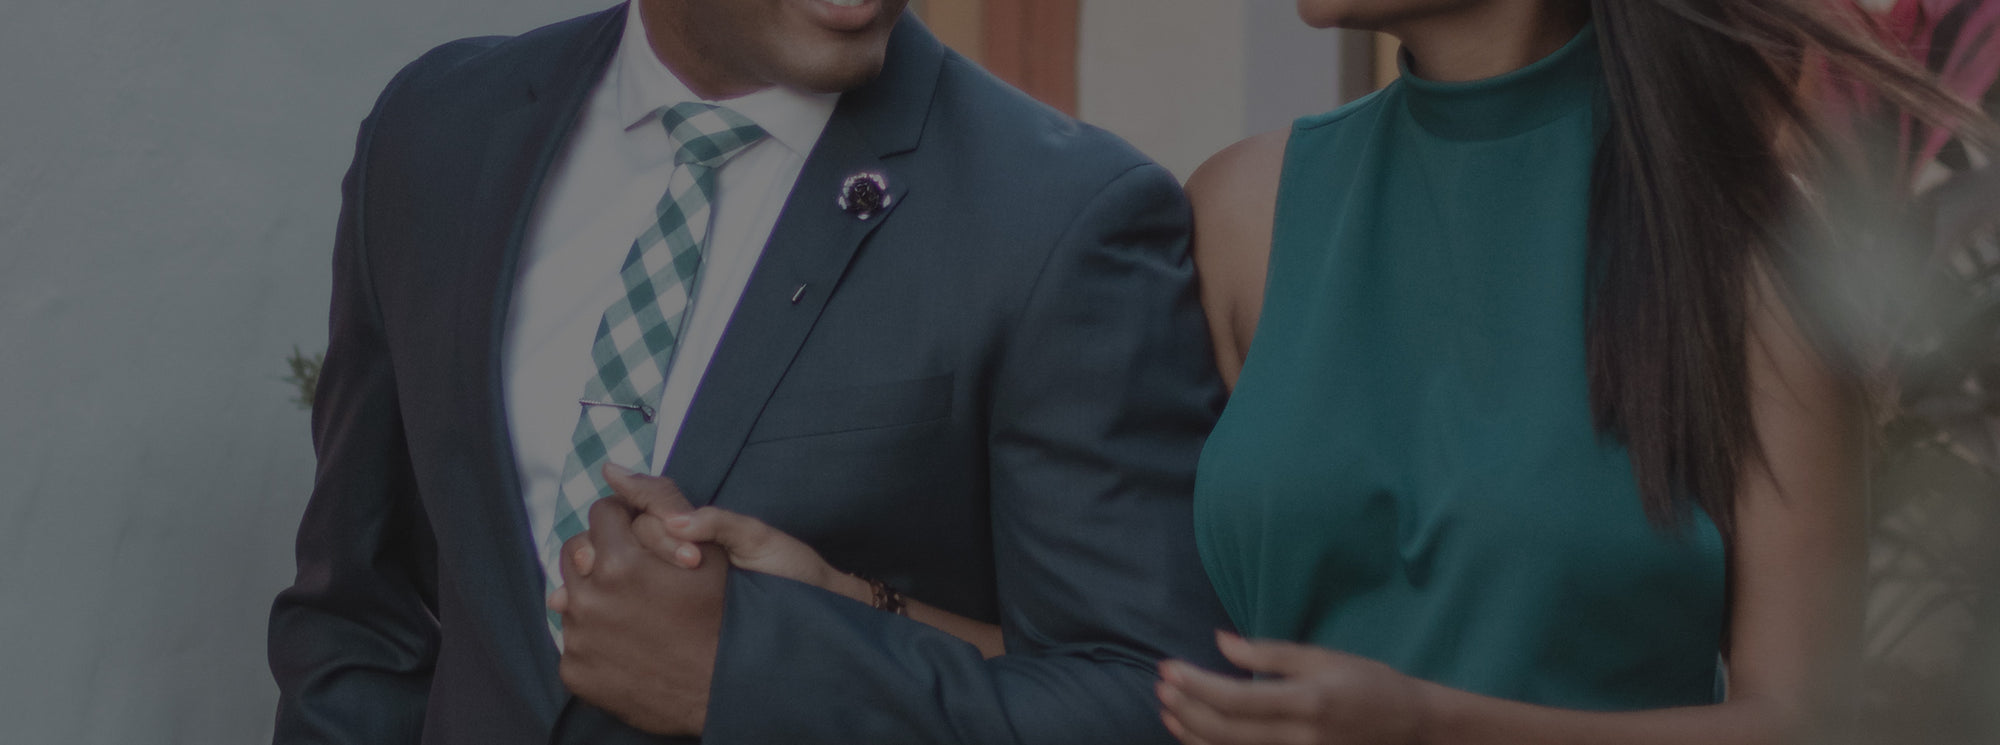 Man wearing a green tie holding hands with a woman in a green dress